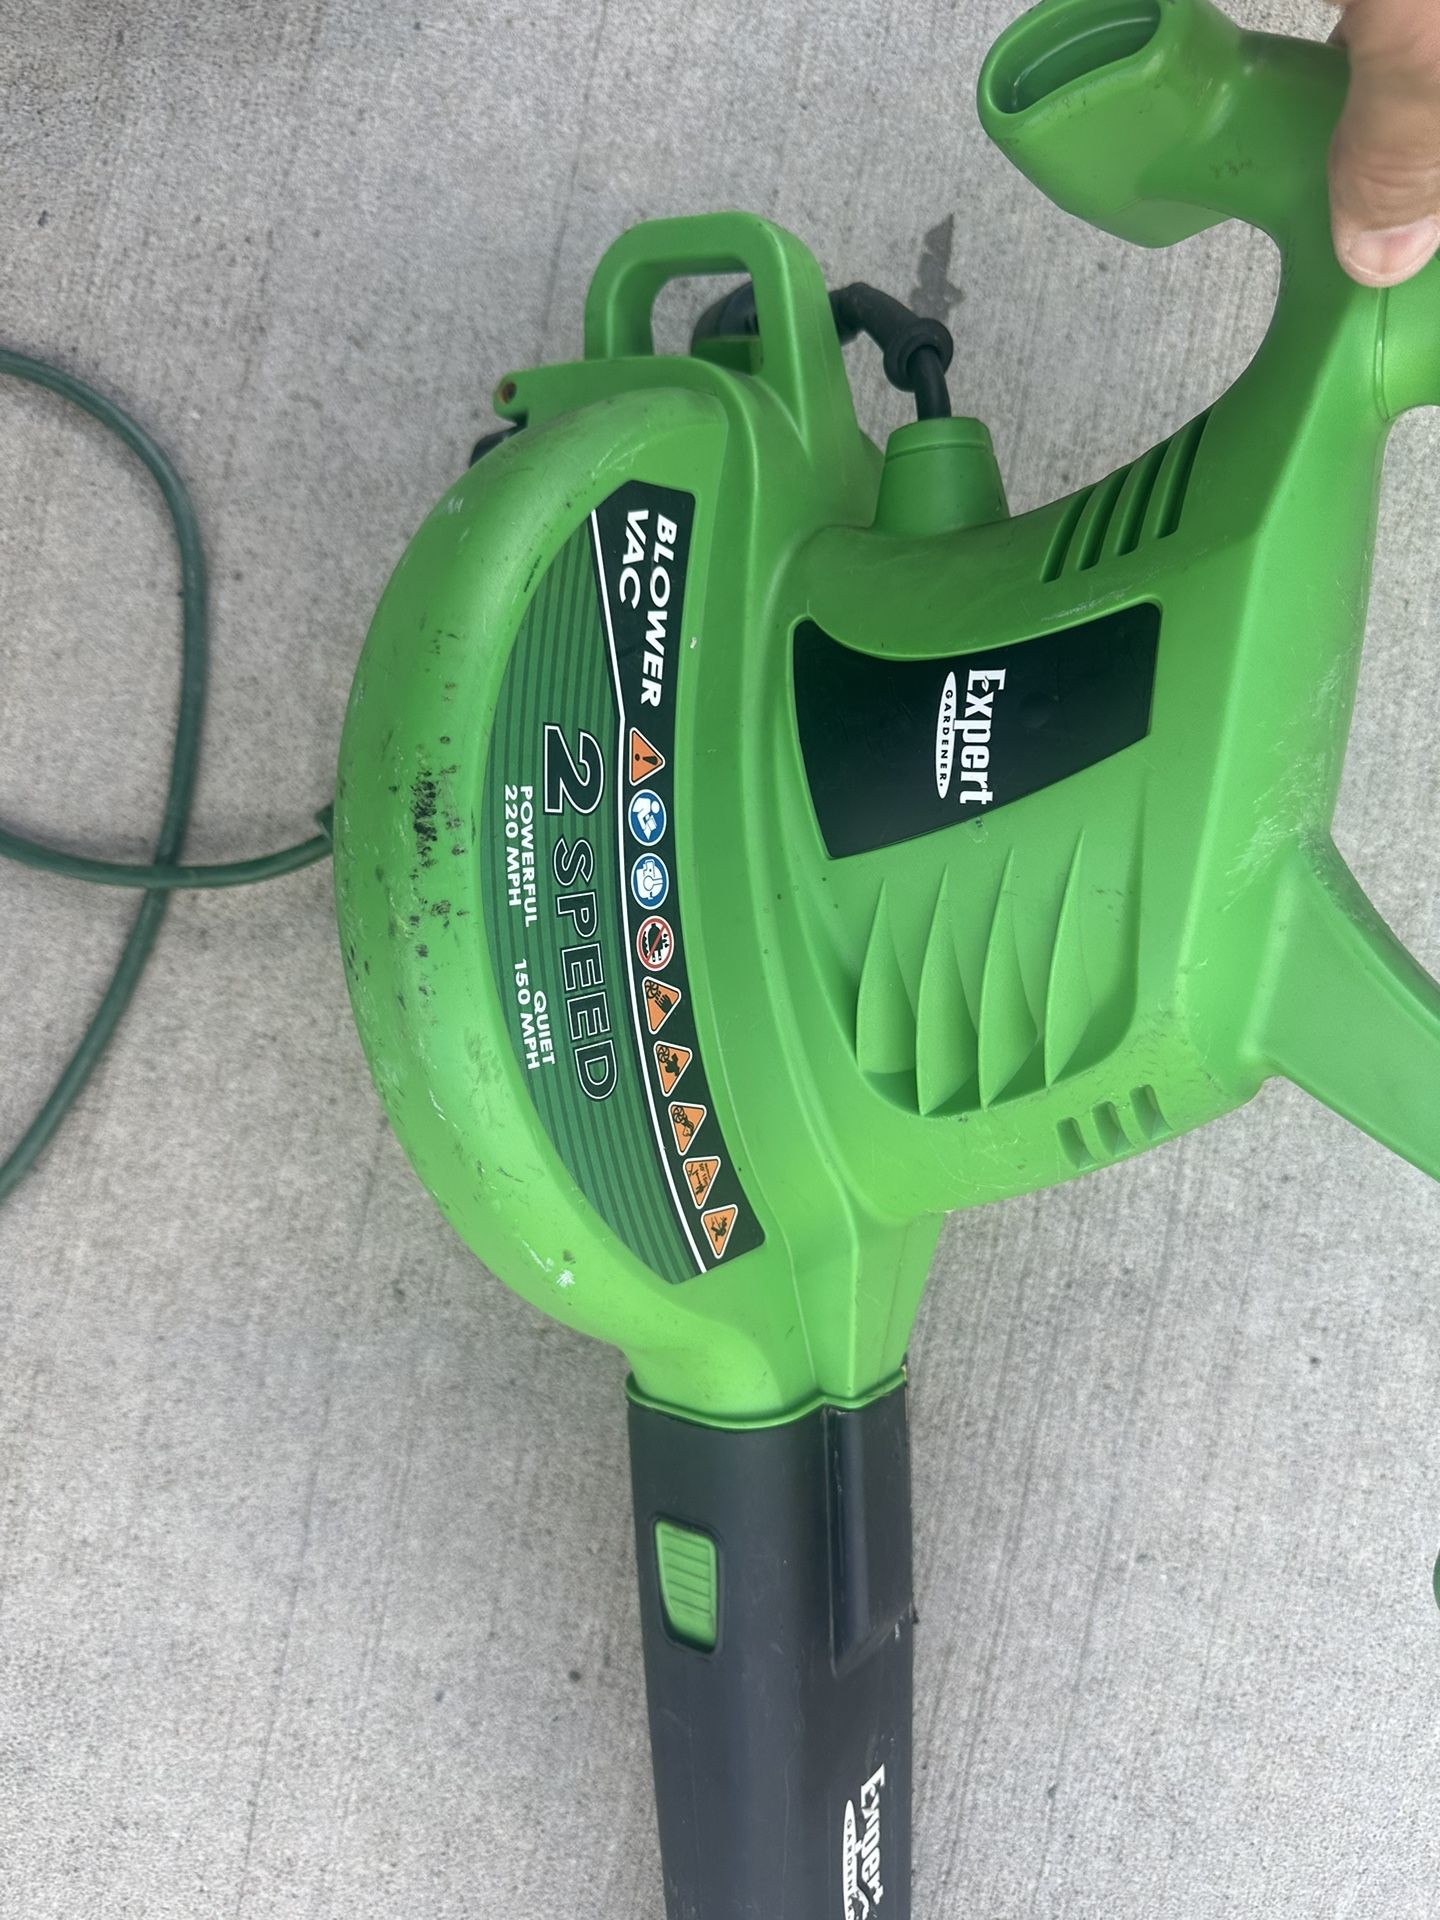 POWERFUL ELECTRIC 12 AMP 2 SPEED LEAF BLOWER 220 MPH $45